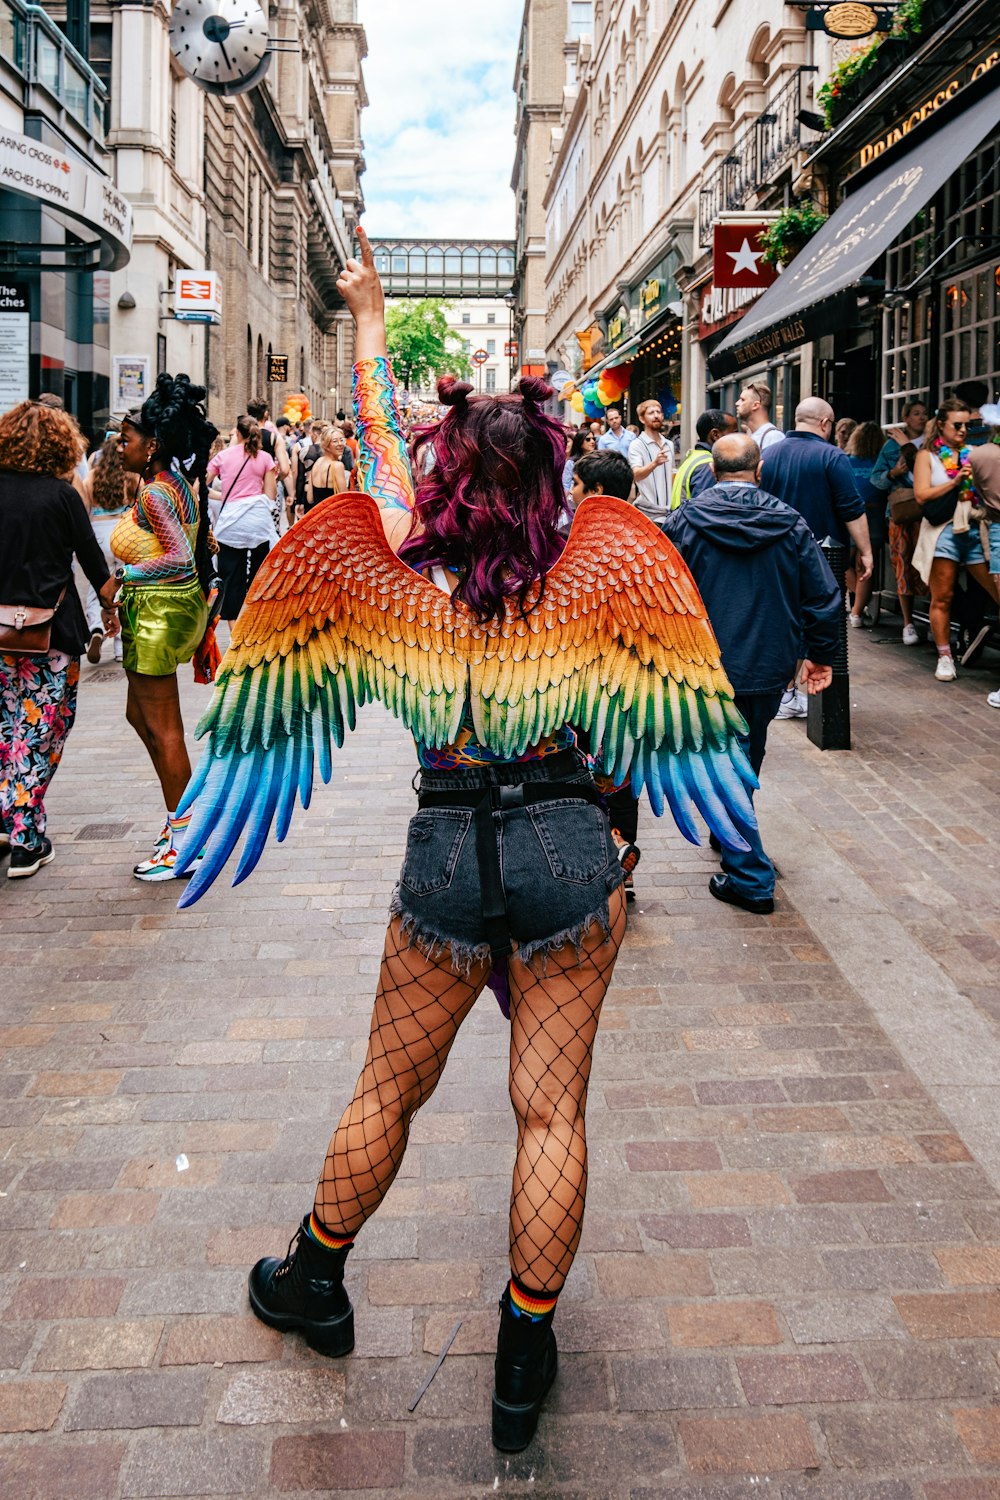 a woman in fishnet stockings and fishnet stockings is holding a colorful bird wings